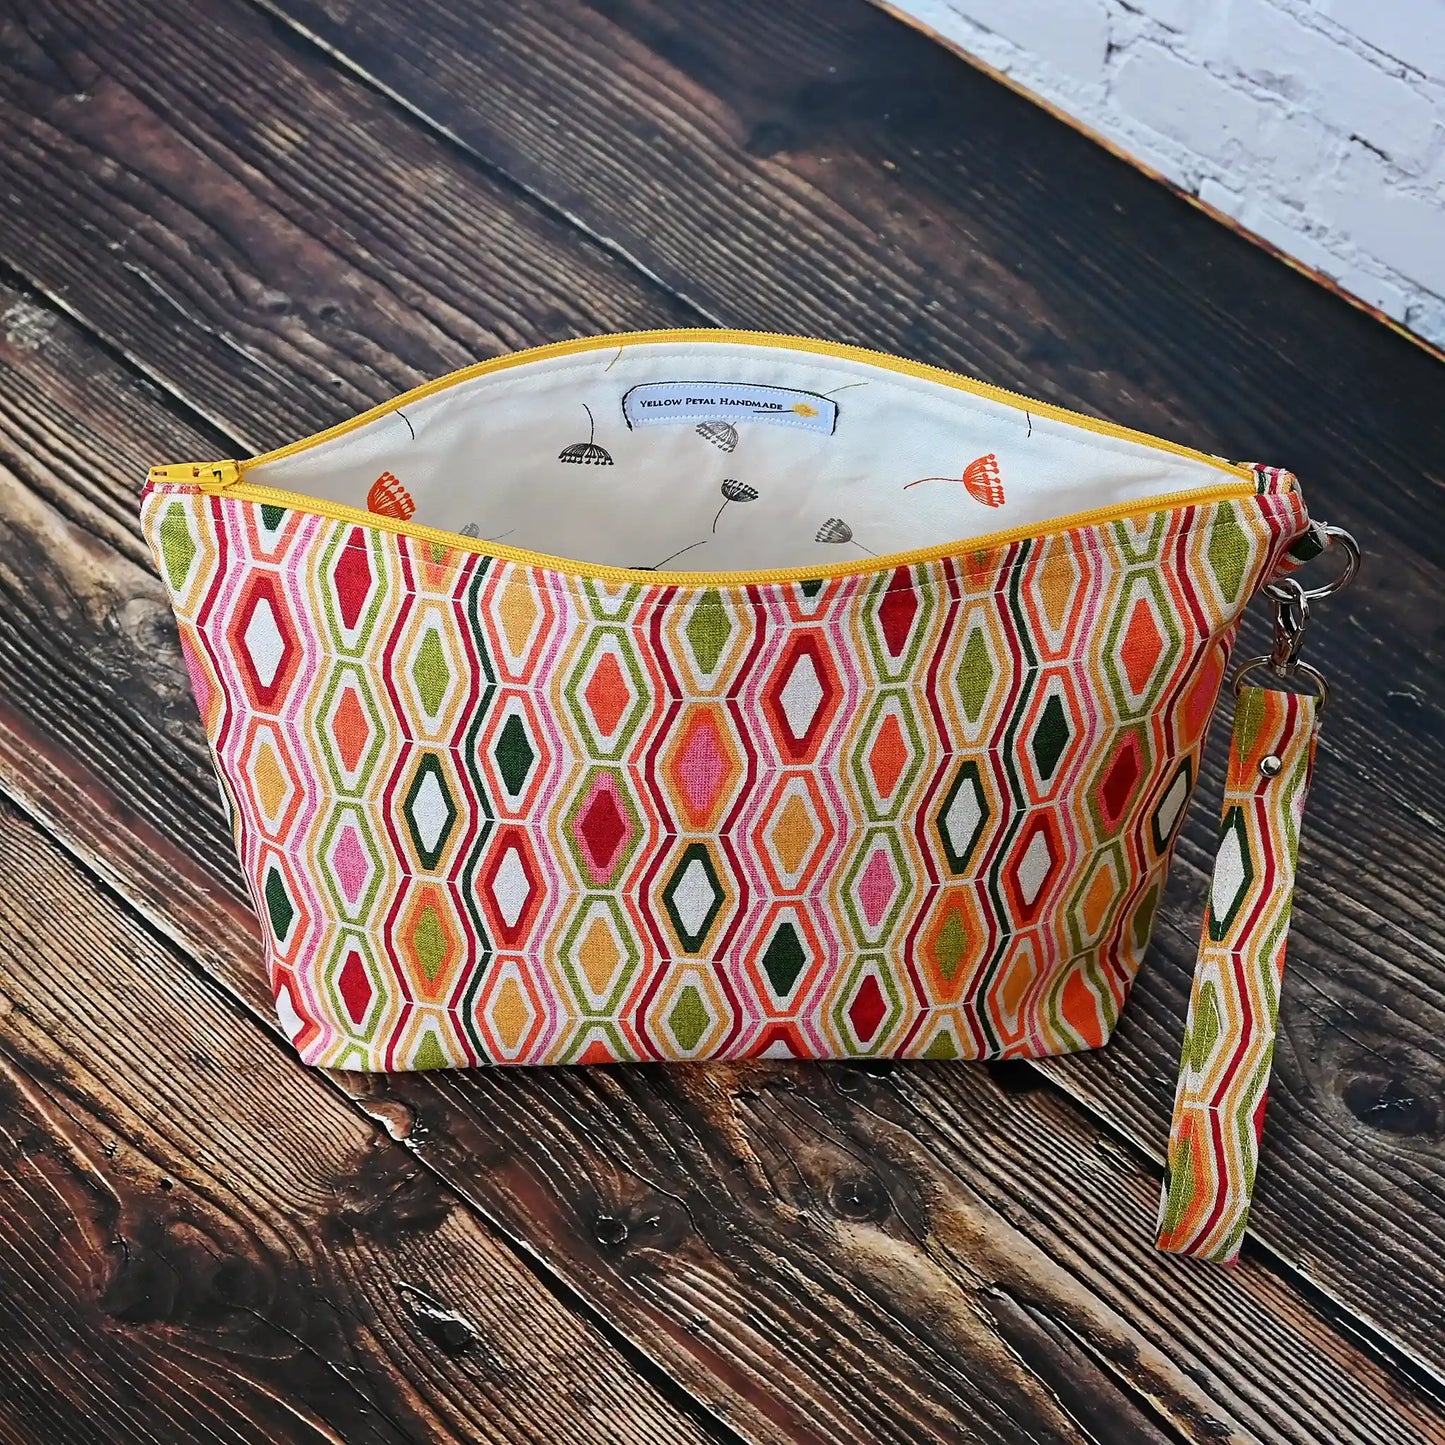 Striking retro jewel tone pouch with removable wrist strap.  Made in Canada by Yellow Petal Handmade.